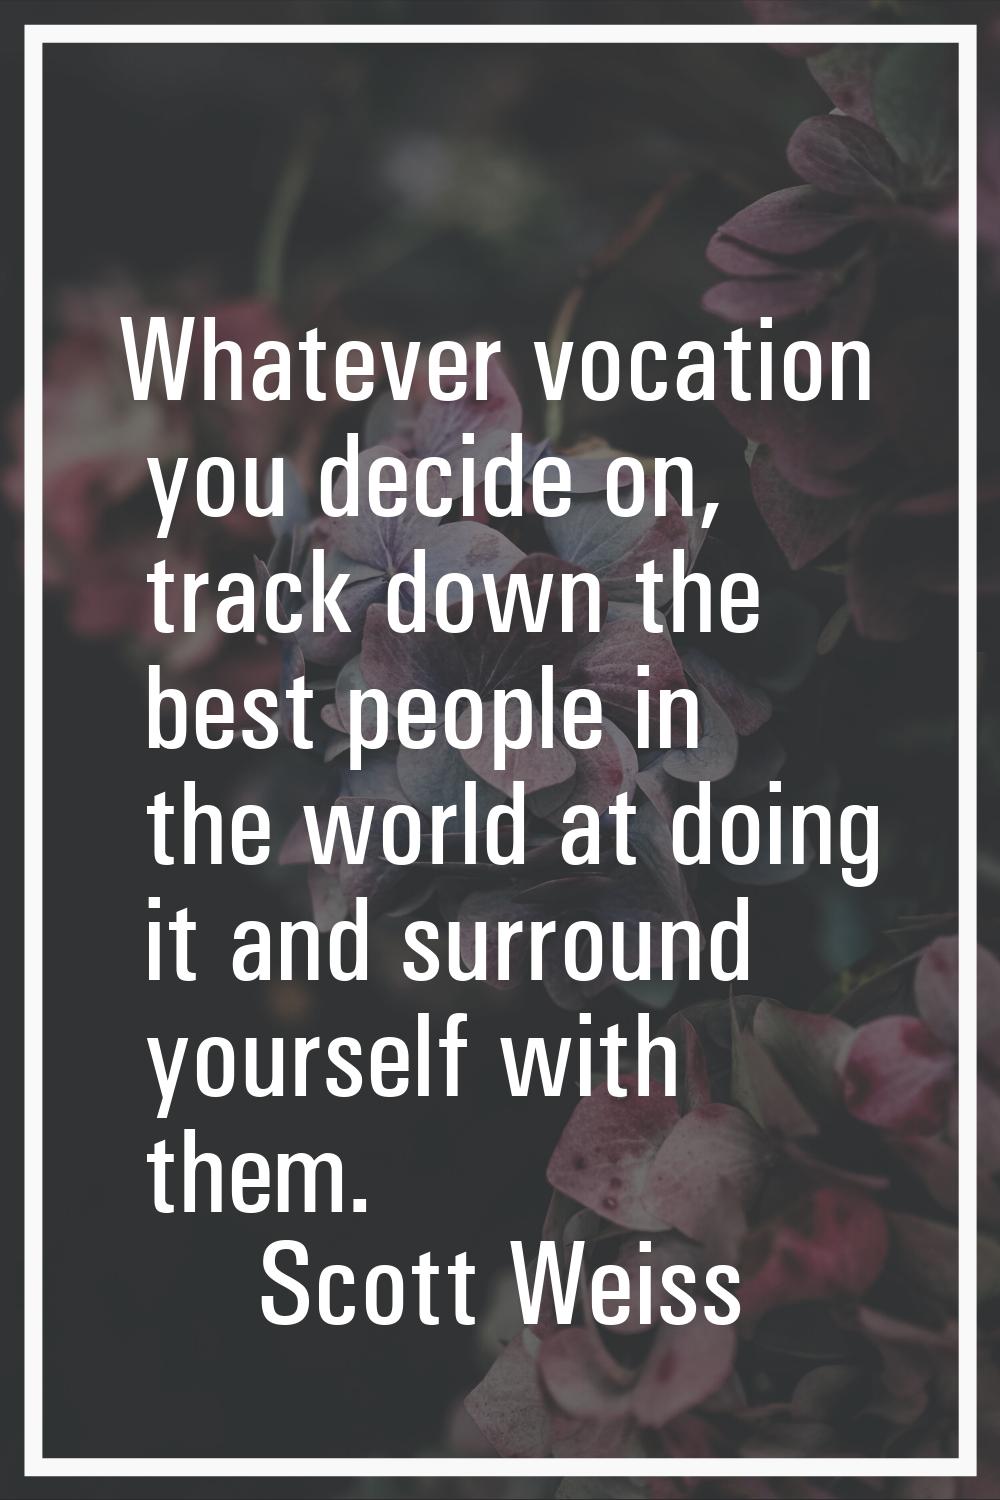 Whatever vocation you decide on, track down the best people in the world at doing it and surround y